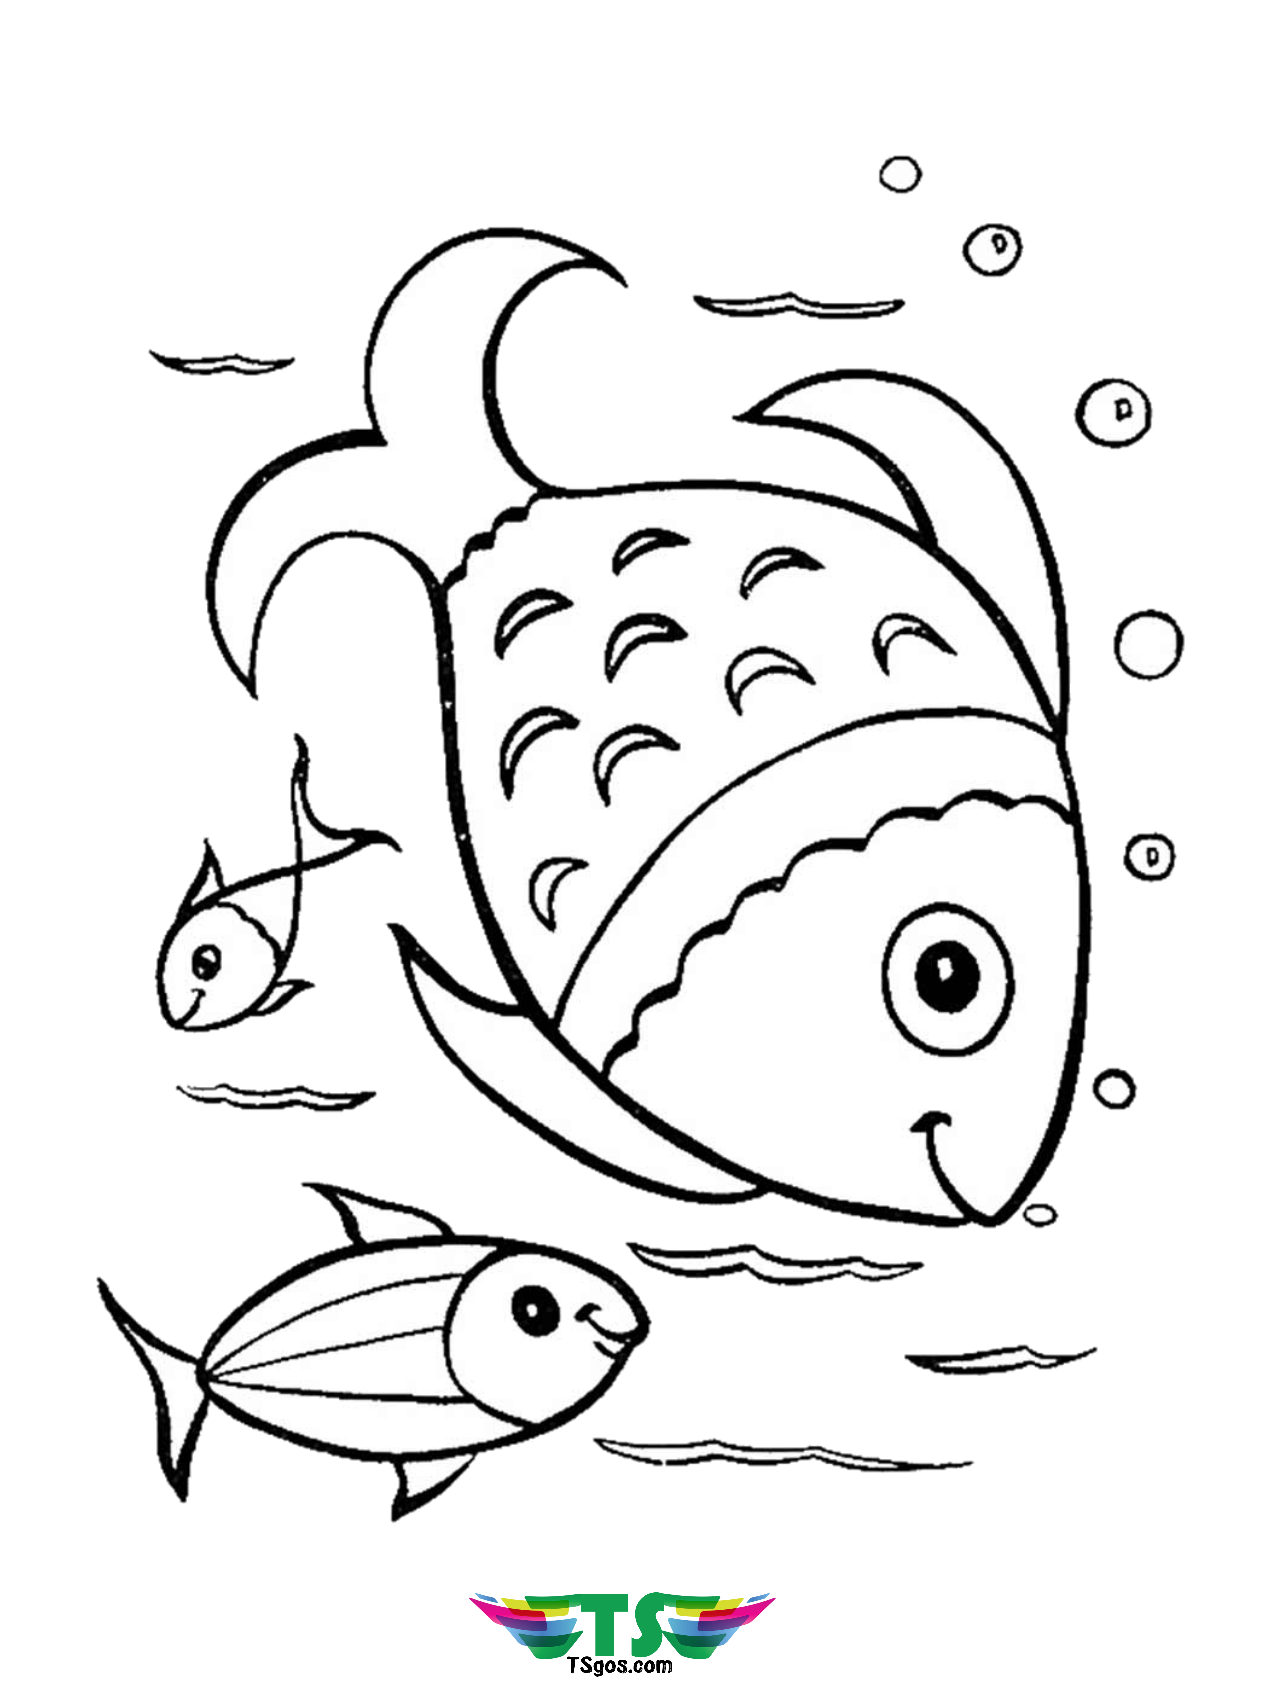 Free download beautiful fish coloring page for toddlers.